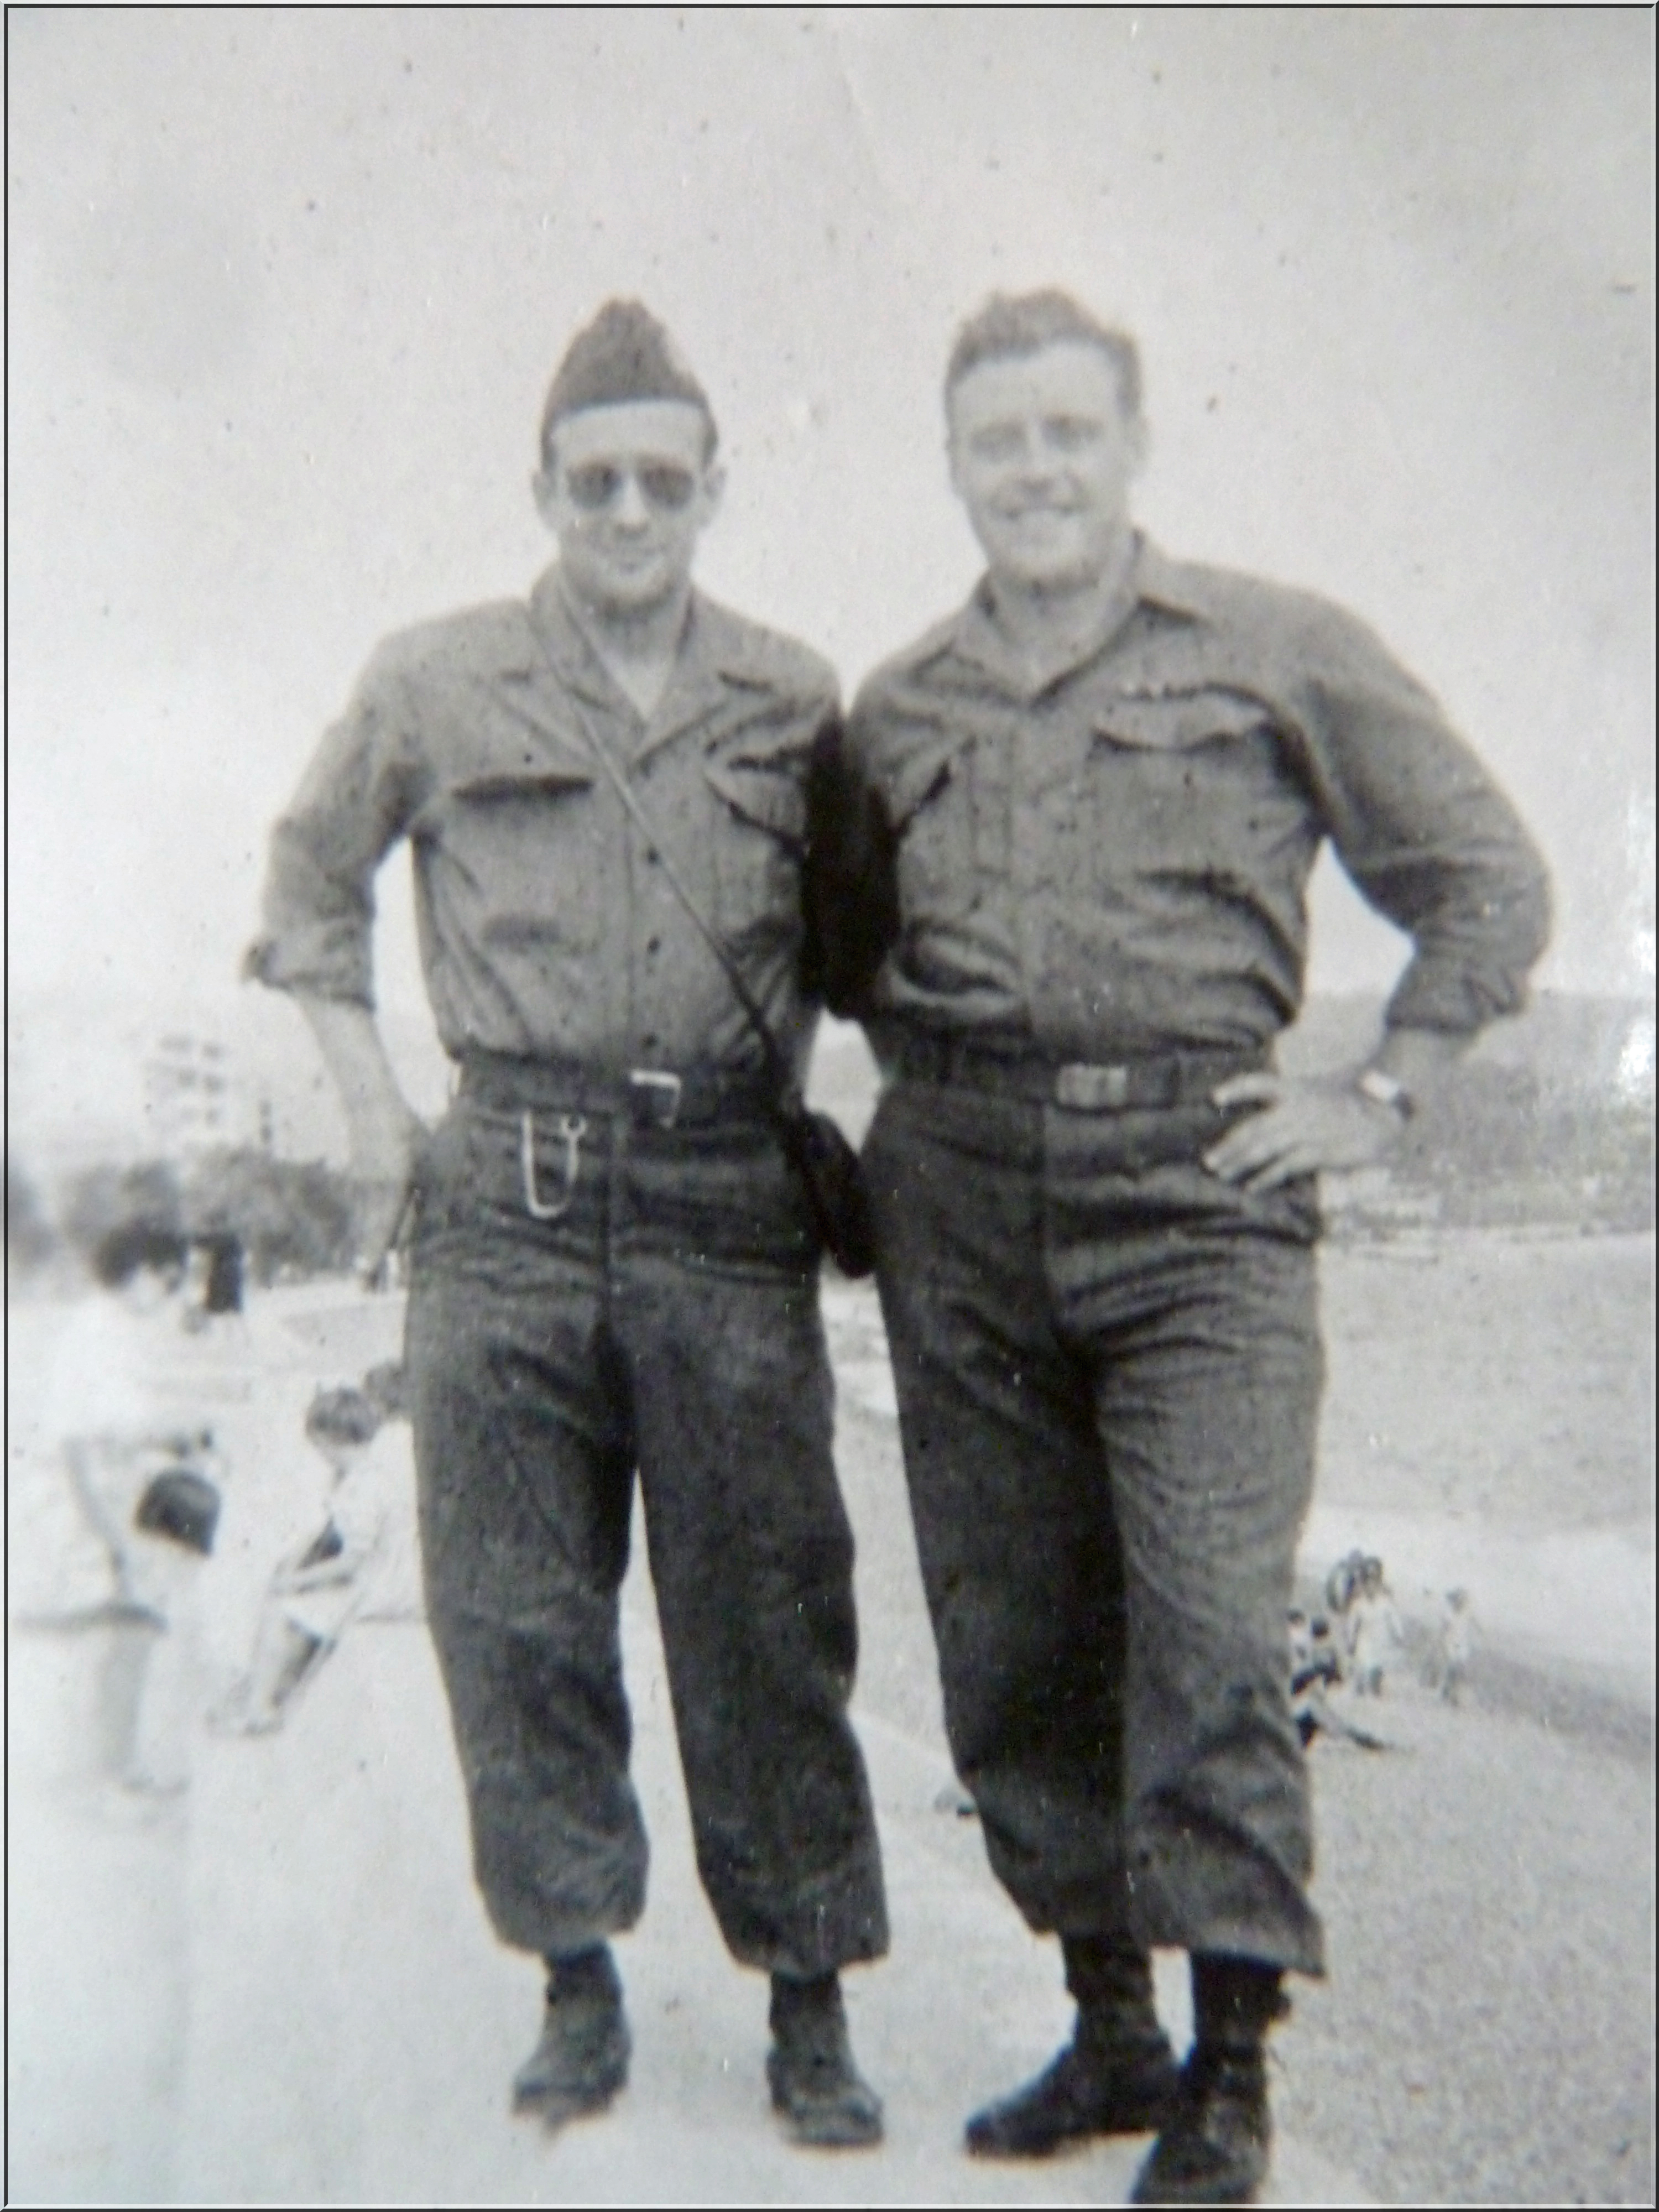 Ken and Doc in Nice, France 1945